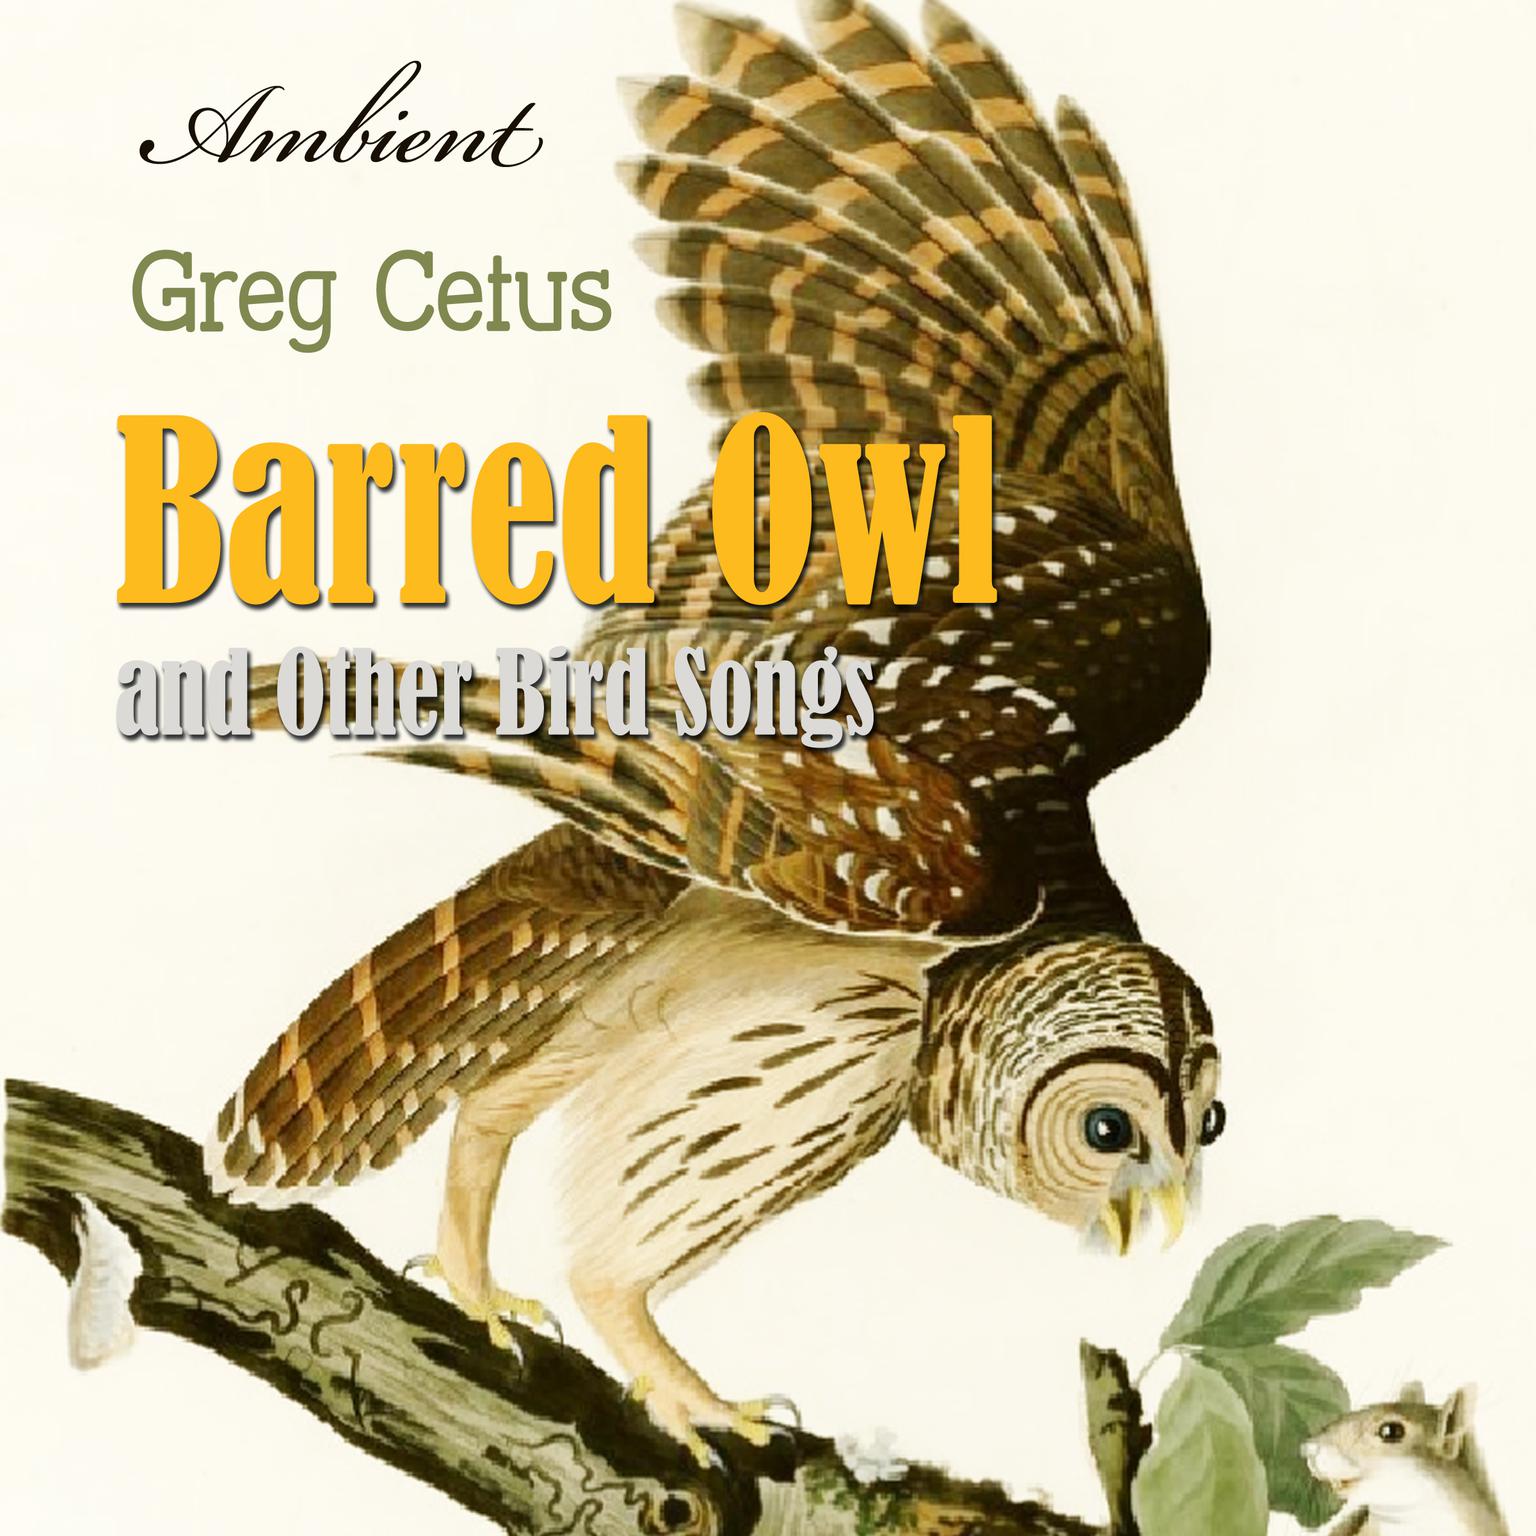 Barred Owl and Other Bird Songs: Nature Sounds for Reflection Audiobook, by Greg Cetus